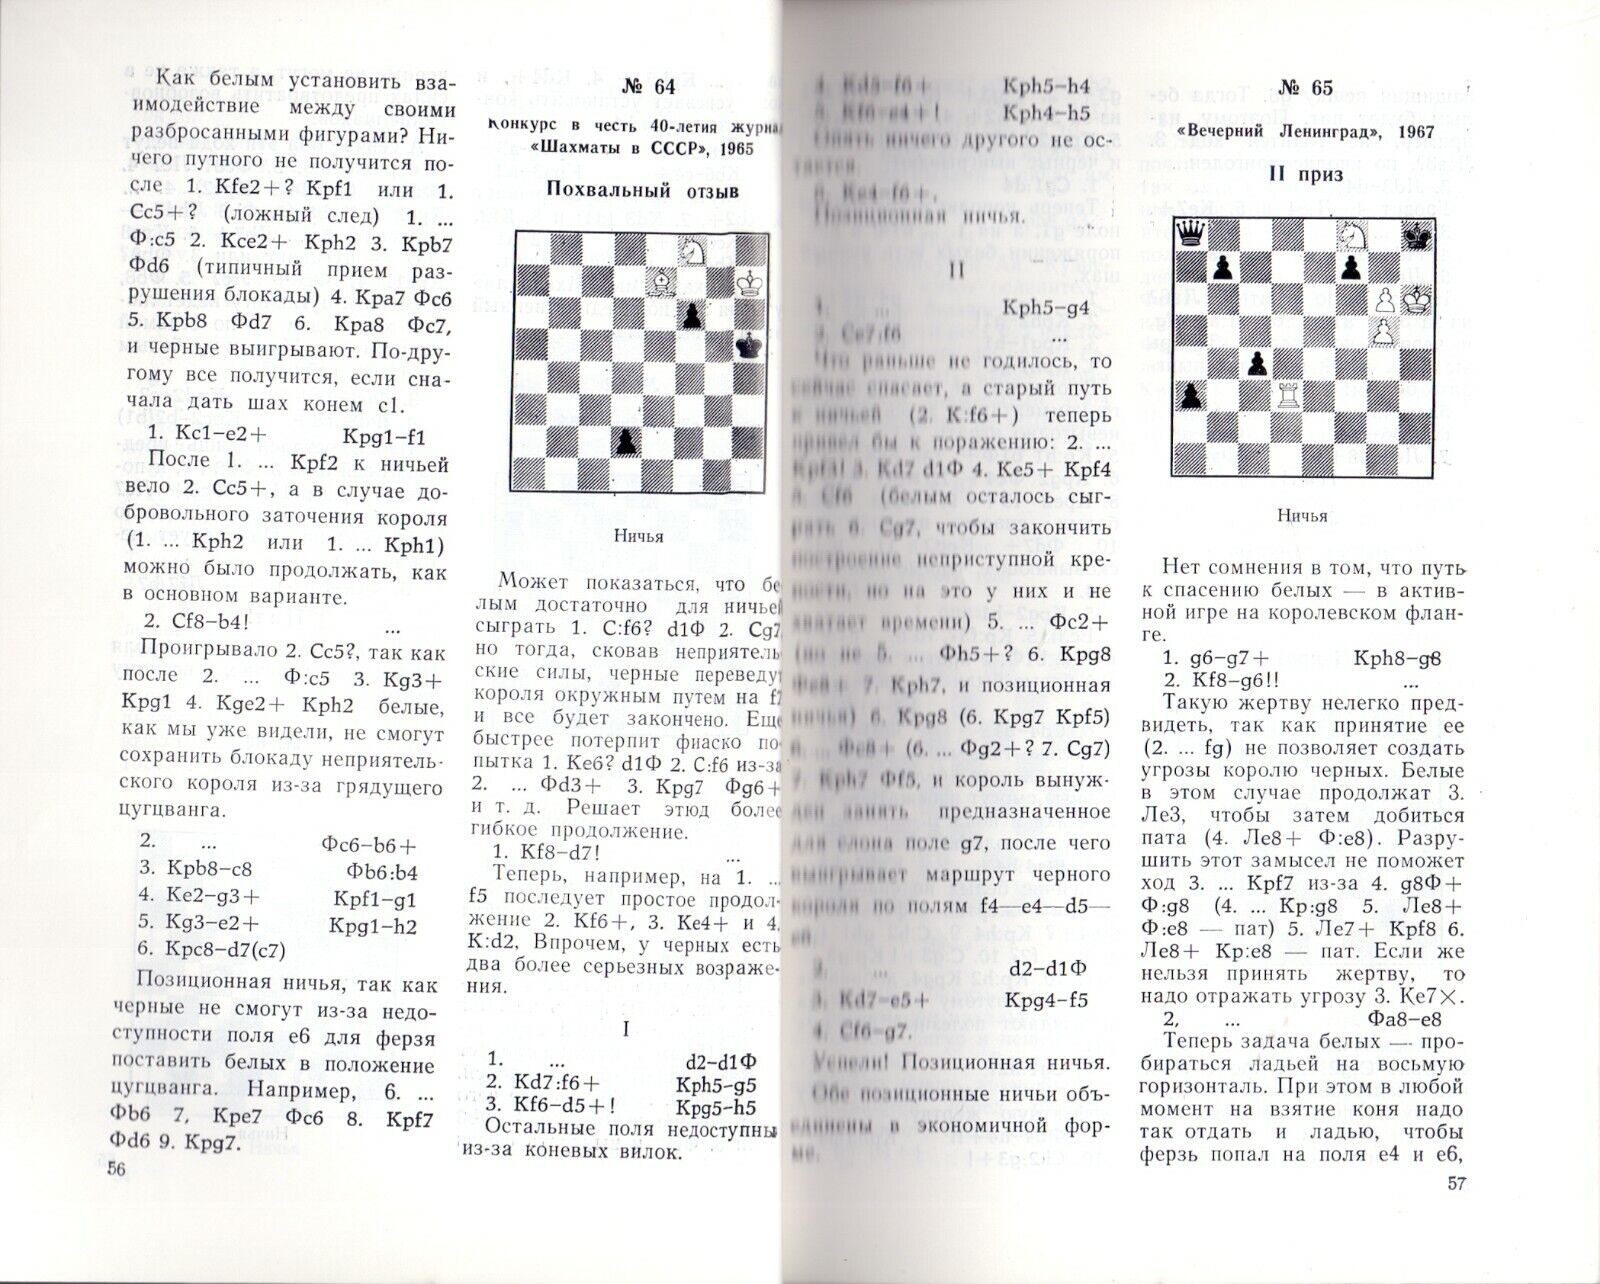 11115.Chess book: Signed by Nadareishvili to Kasparov. In search of beauty 1986